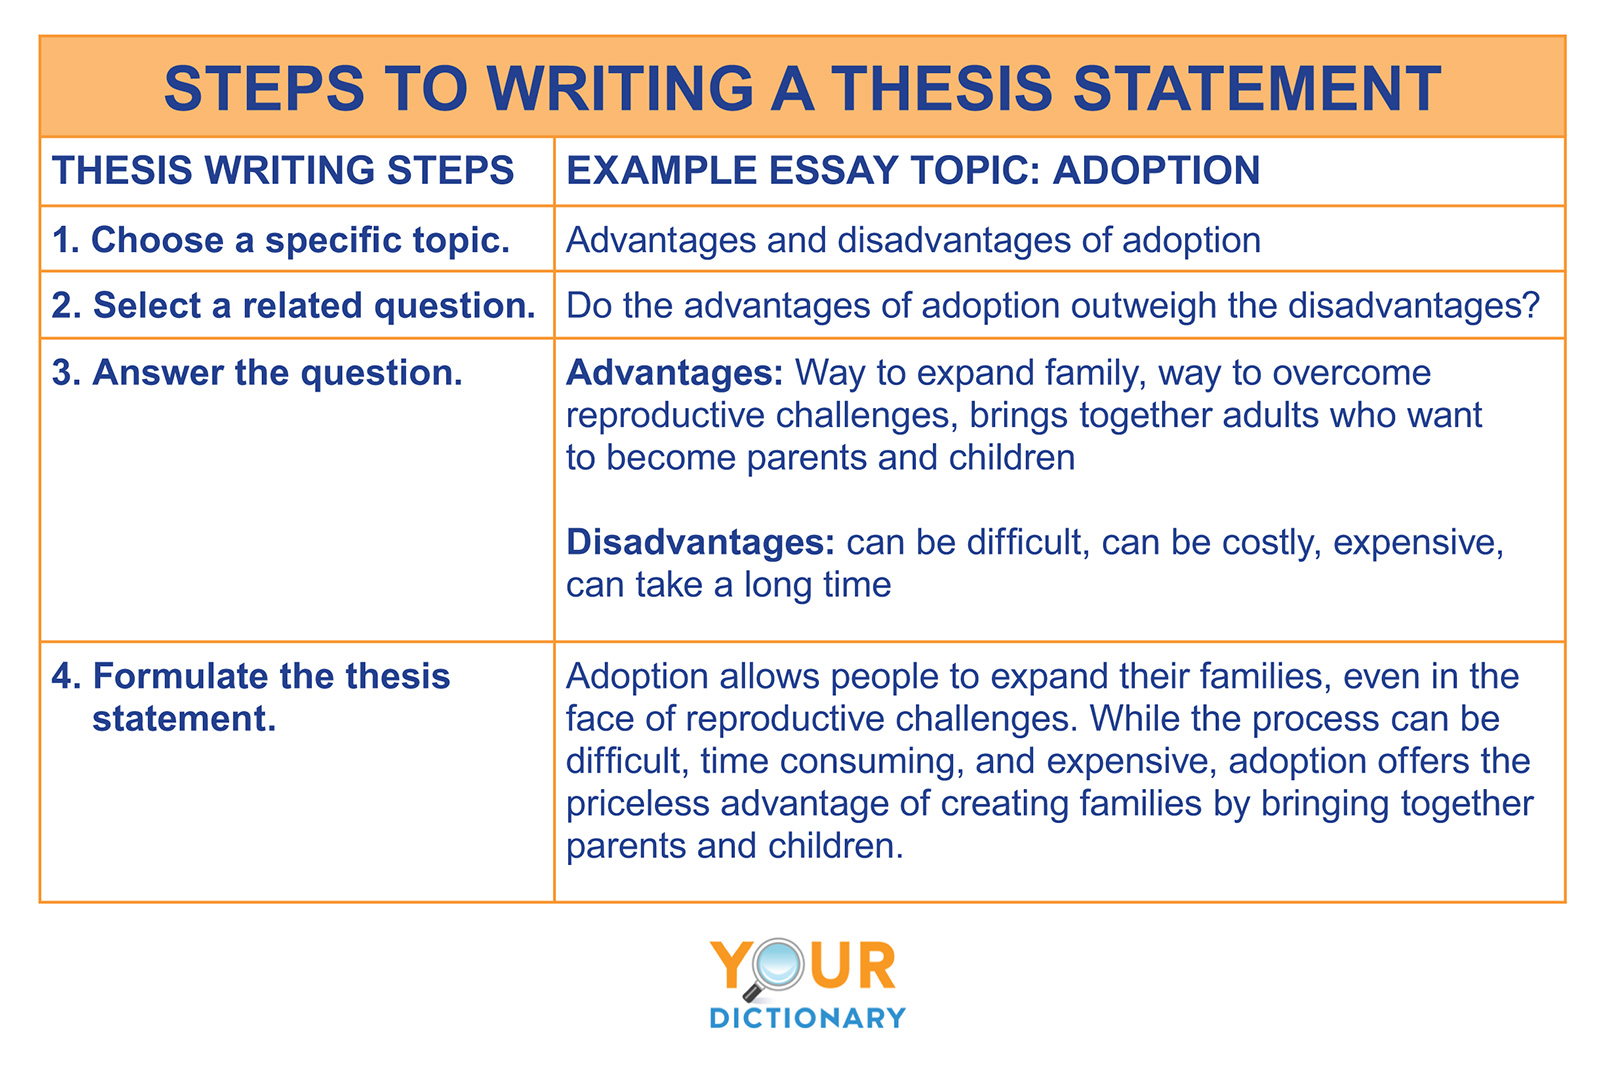 write a thesis statement for your argument against online learning